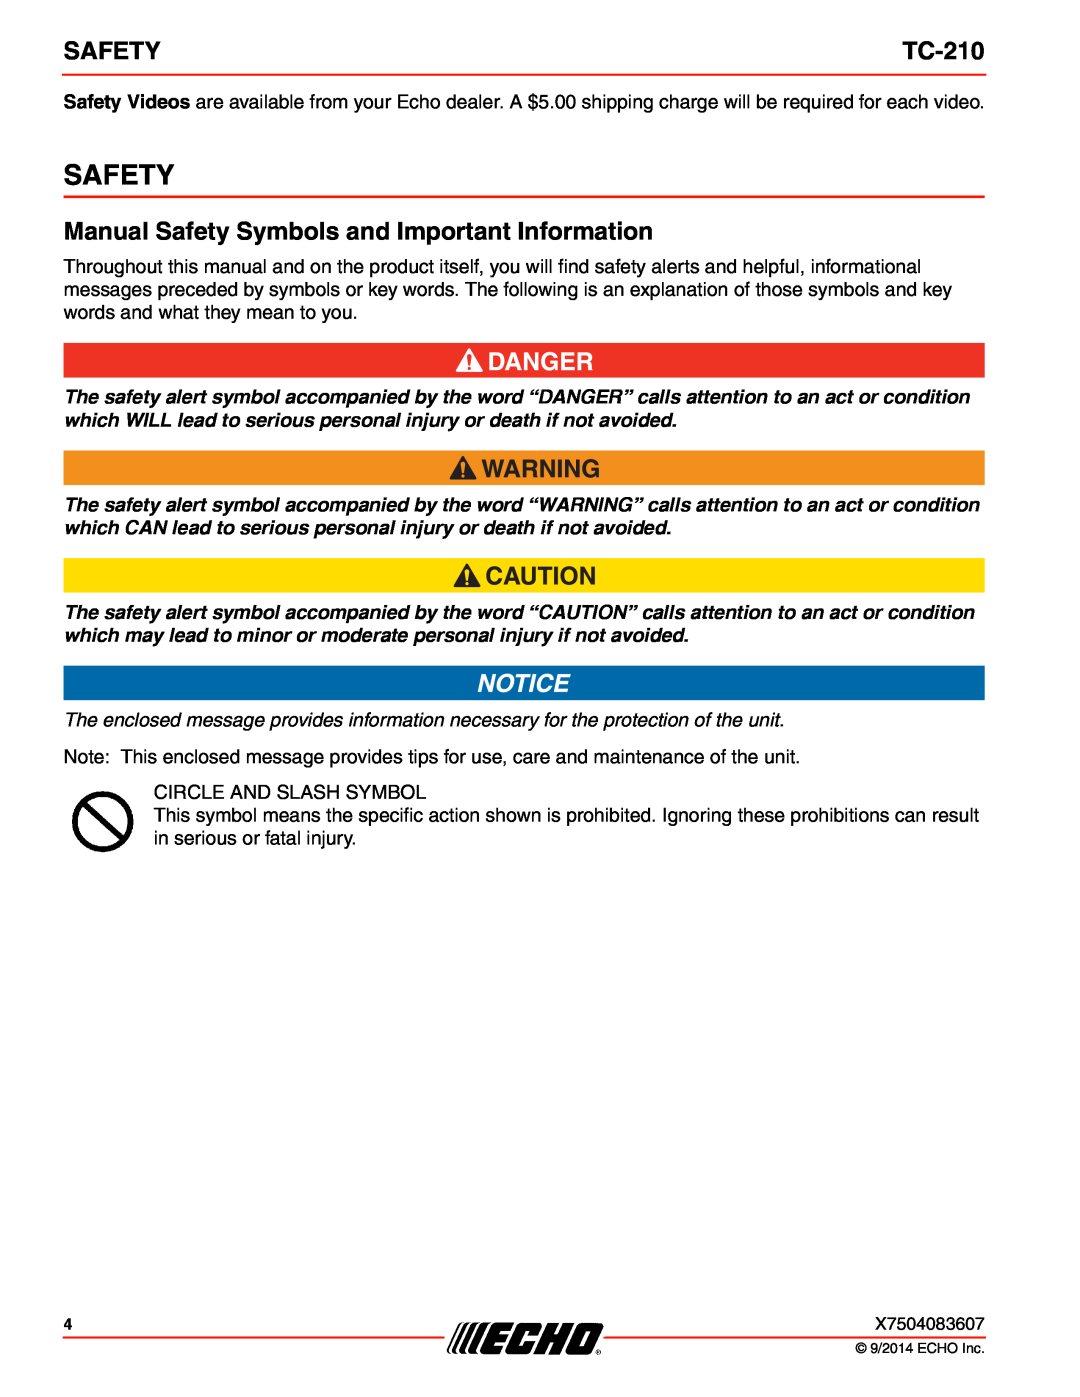 Echo TC-210 specifications Manual Safety Symbols and Important Information 